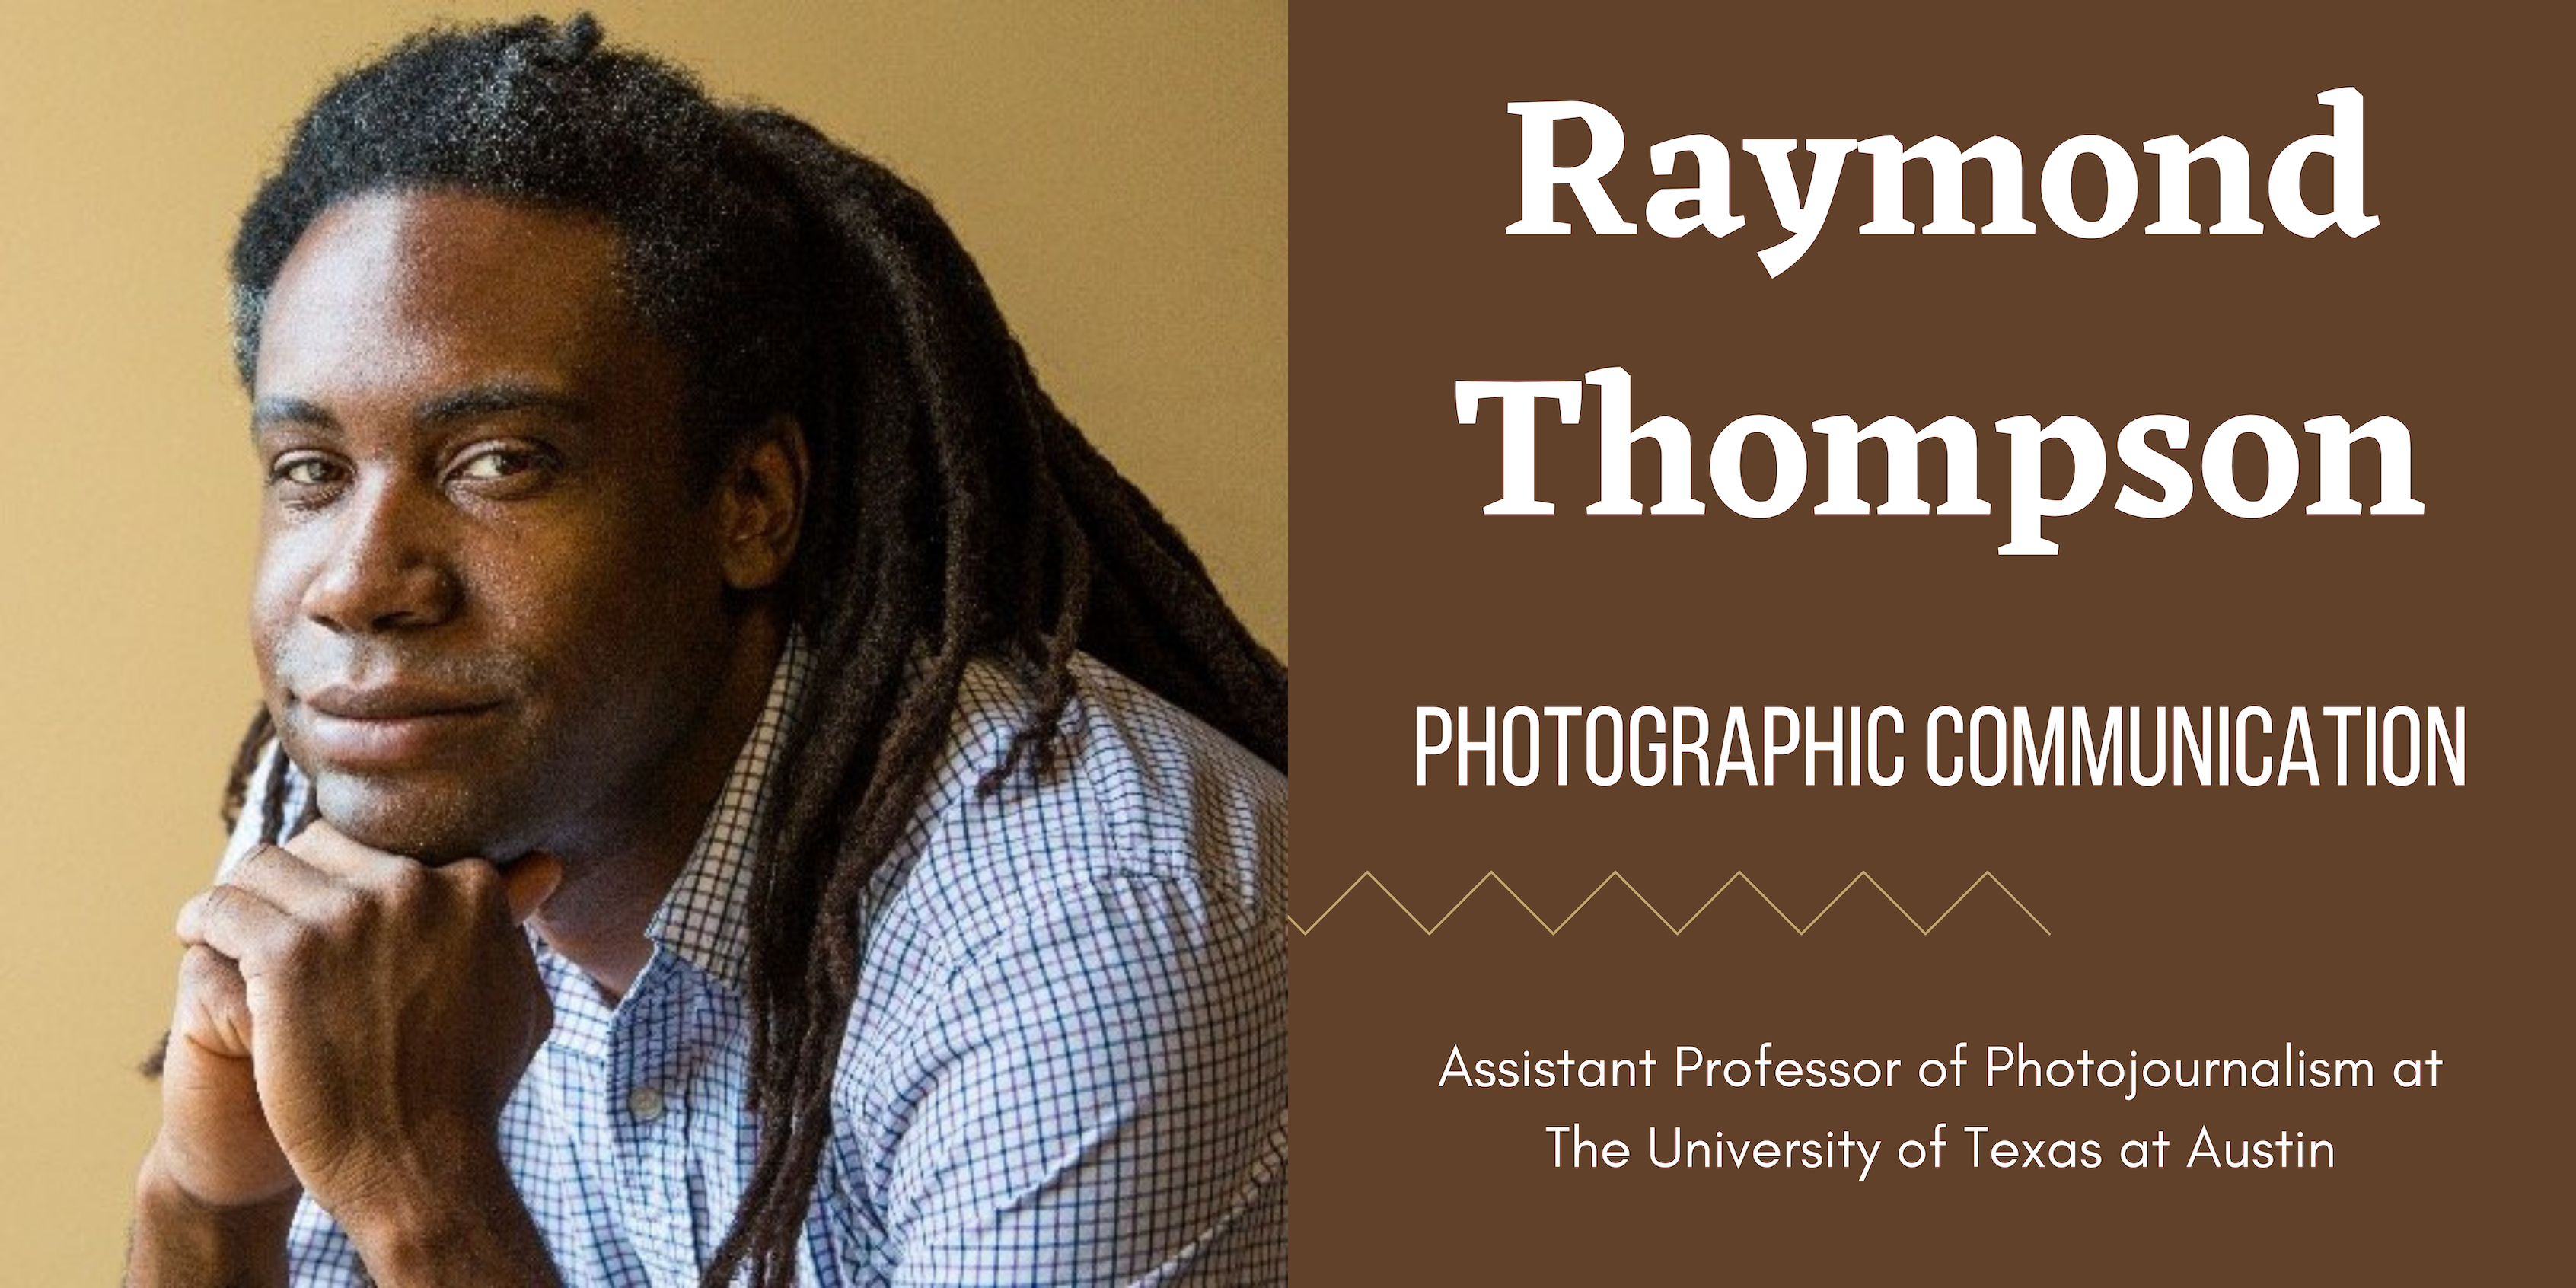 On the left is a photo of Assistant Professor Raymond Thompson. On the right on a brown background is white text that says, "Raymond Thompson," "Photographic Communication" and his job title.